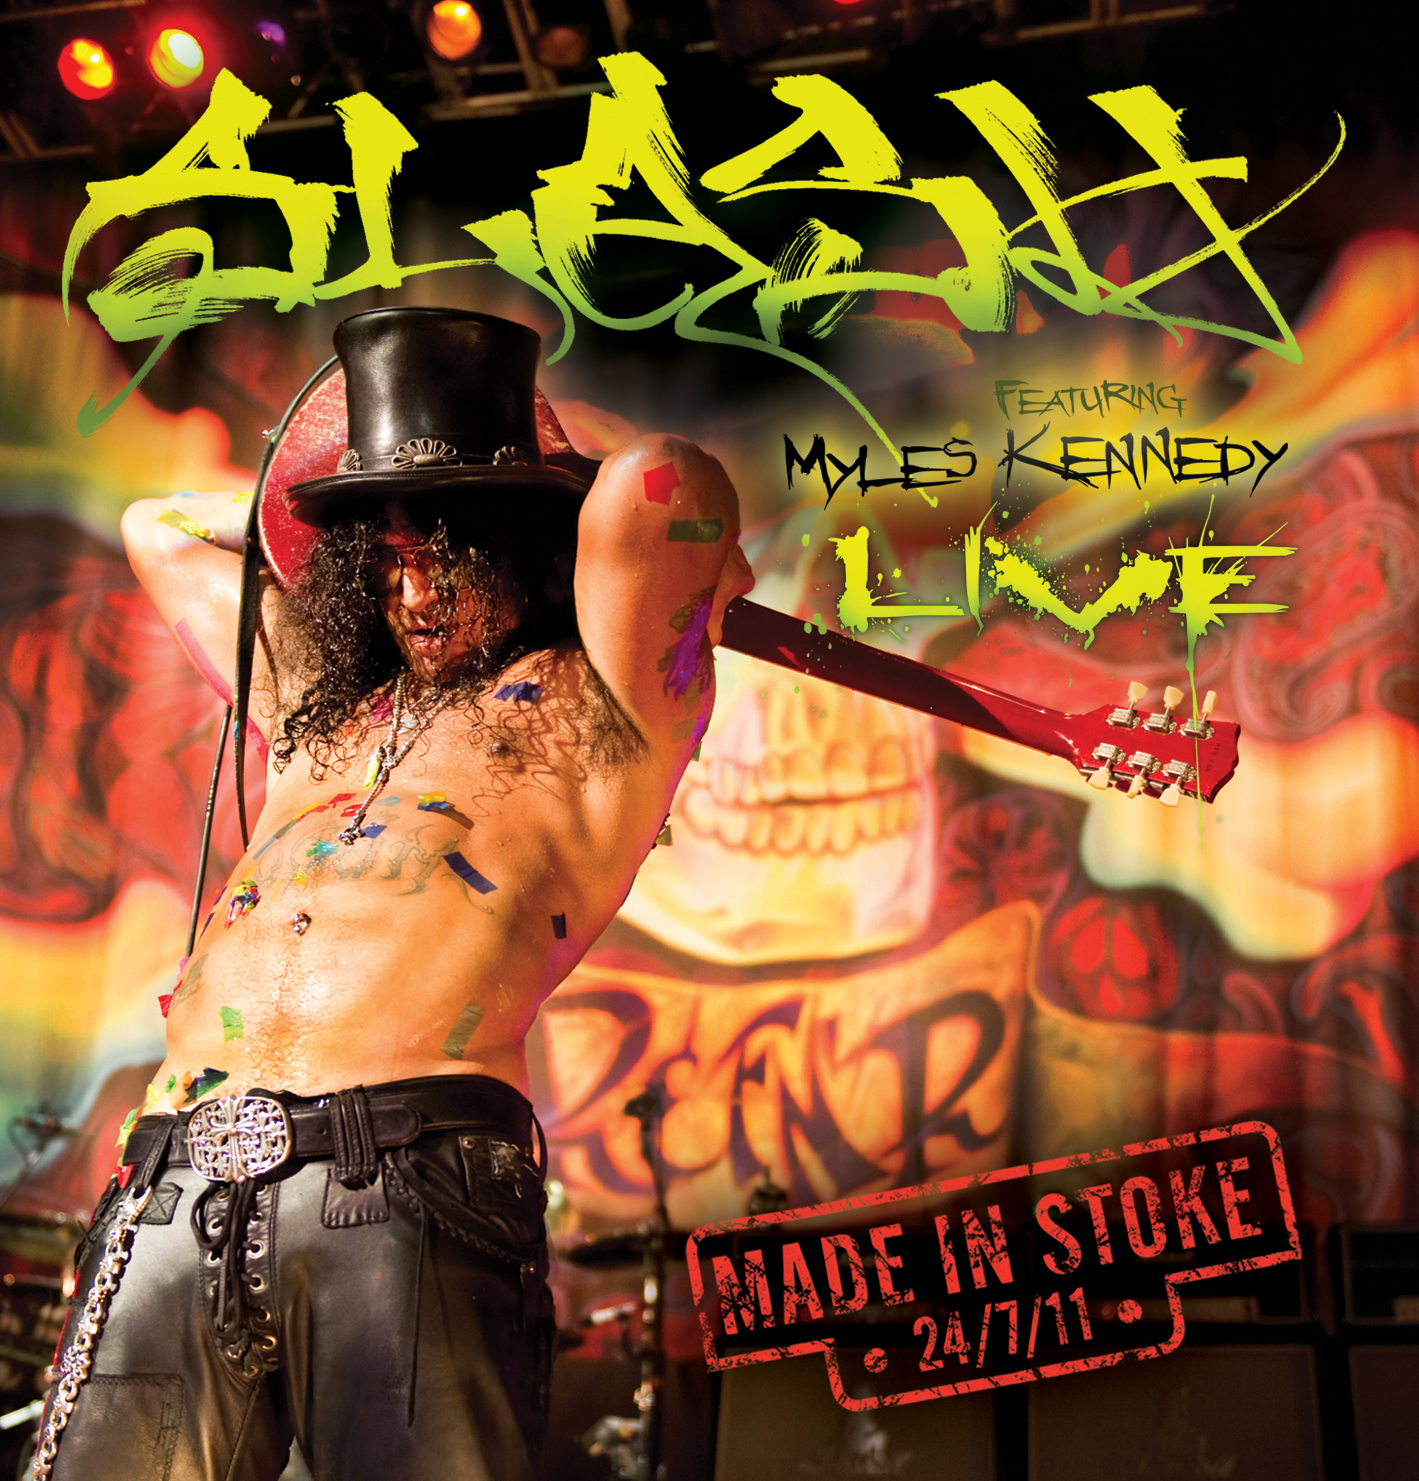 MADE IN STOKE 24/7/11 (W/DVD) (DLX) (DIG)